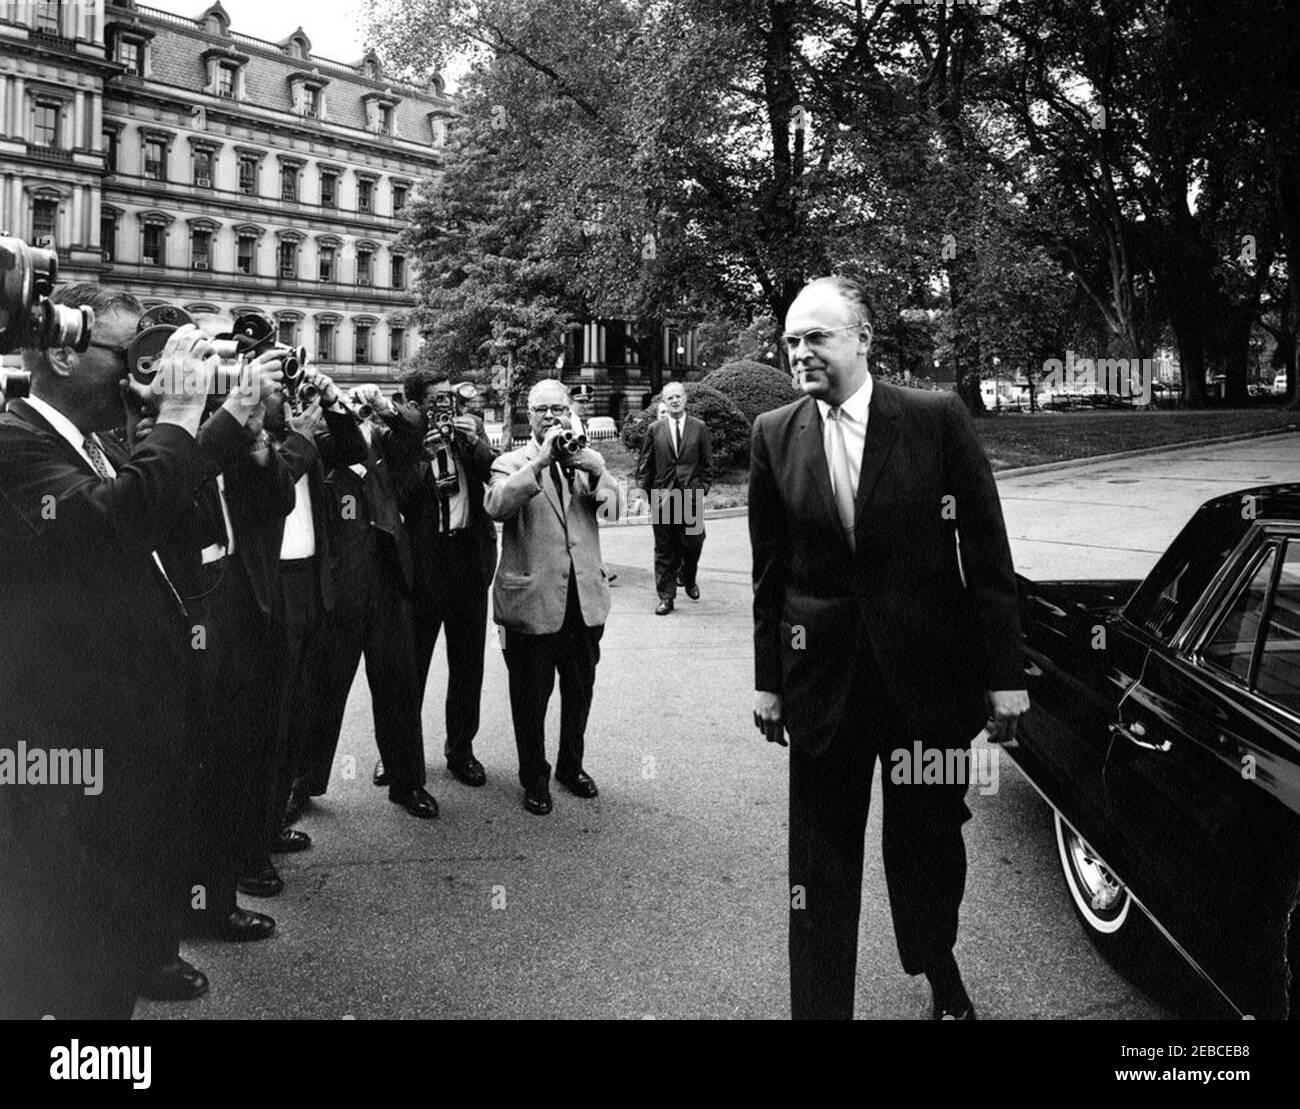 Meeting with the Ambassador of the Soviet Union (USSR), Anatoly Dobrynin, 6:00PM. Anatoly F. Dobrynin, Ambassador to the United States from the Union of Soviet Socialist Republics (USSR), arrives for a meeting with President John F. Kennedy. Photographers observe. West Executive Drive, White House, Washington, D.C. Stock Photo